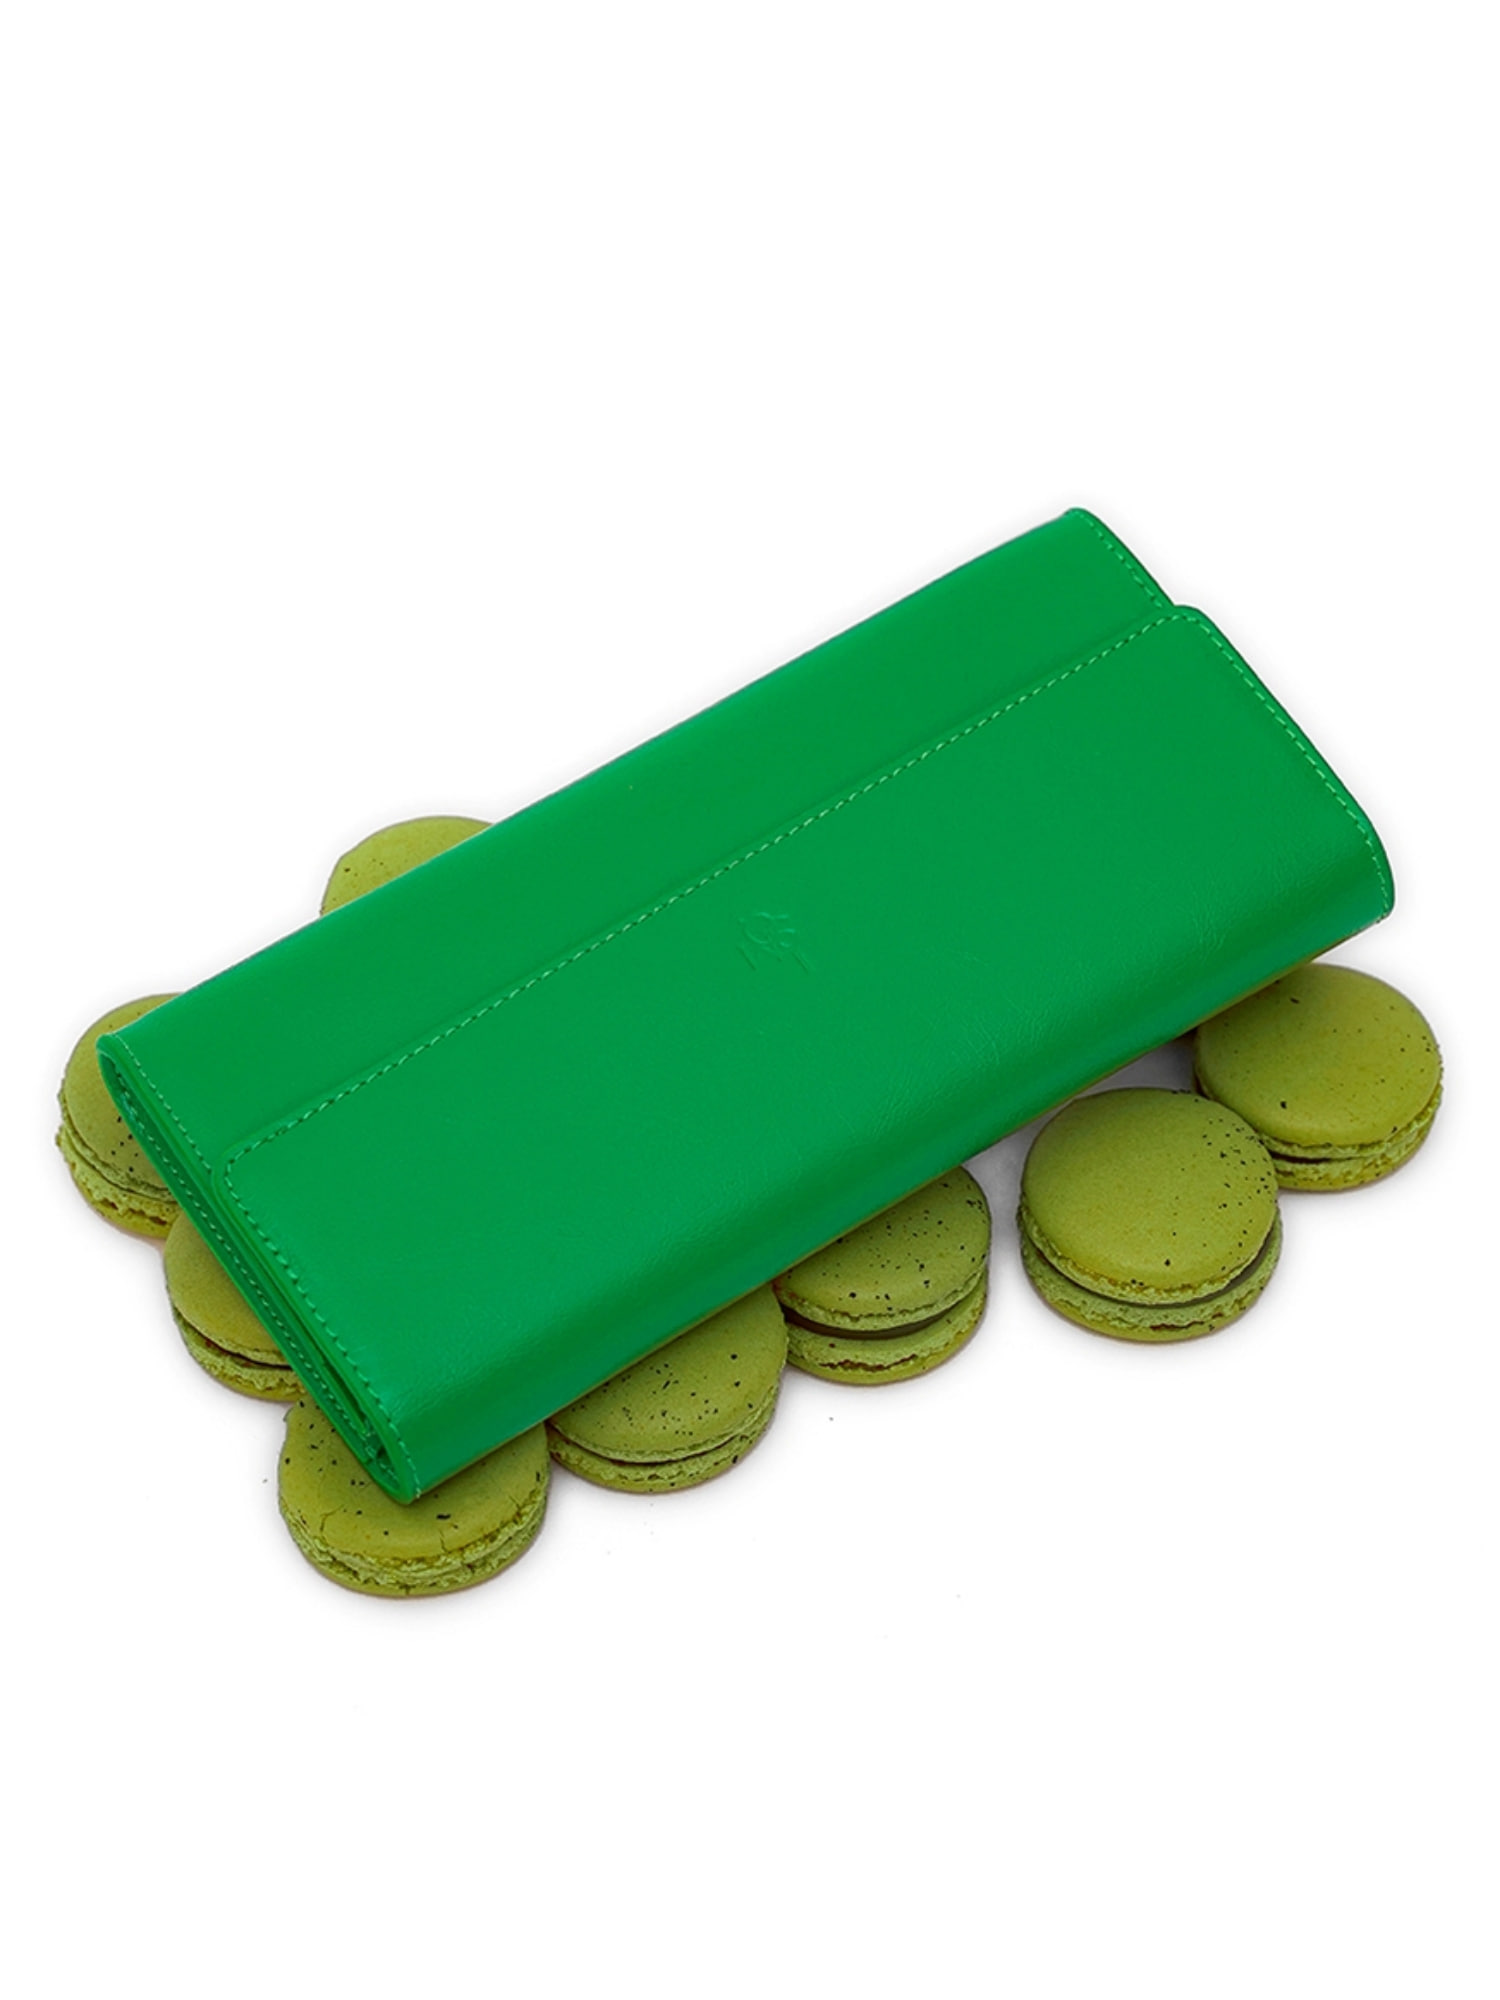 VICTORY GOLF Phone Wallets - Green